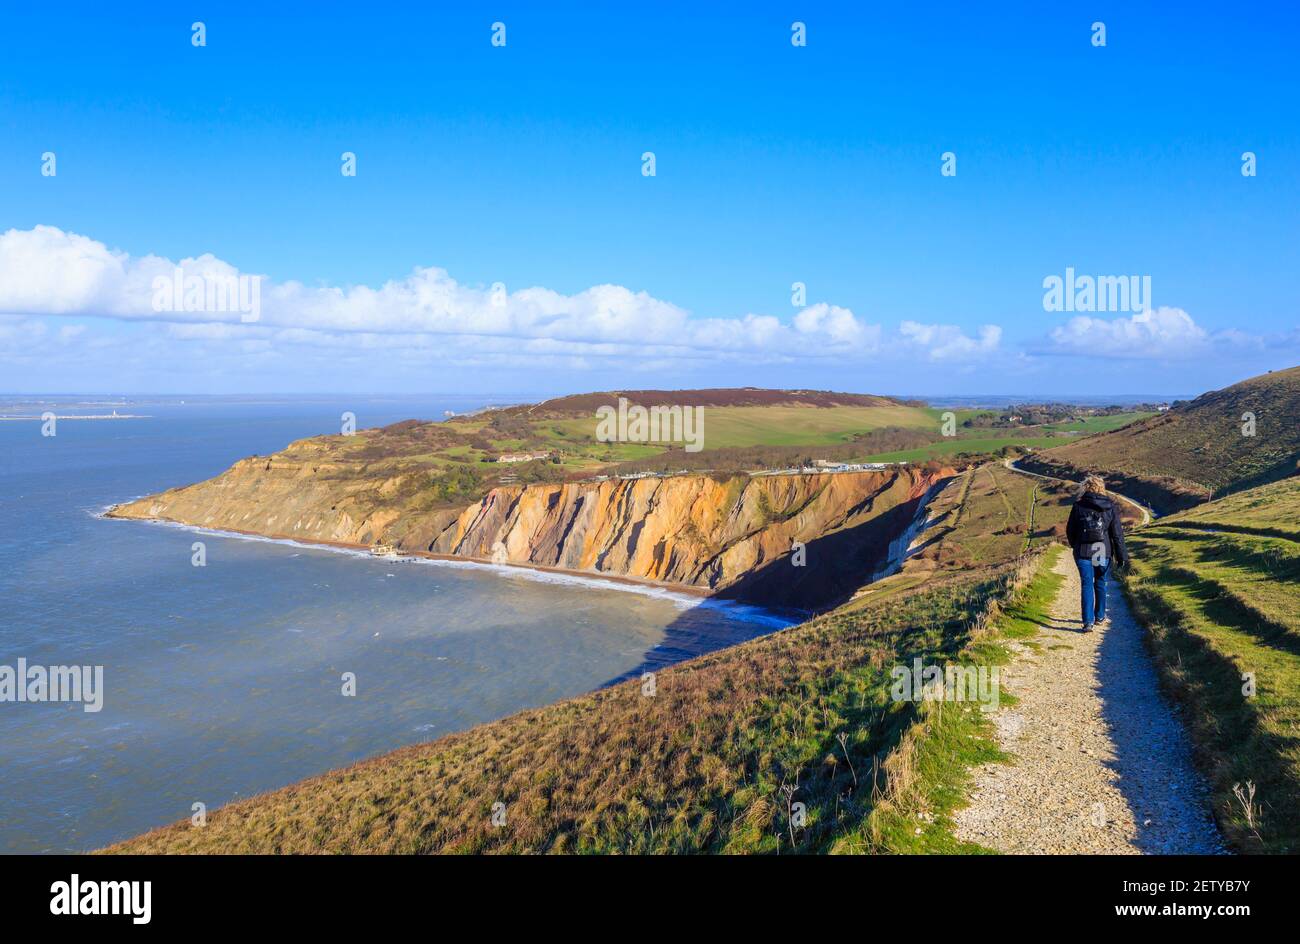 The multi-coloured Eocene sand cliffs of Alum Bay, Isle of Wight, from which sand layer tourist souvenirs are made and view across the Solent Stock Photo